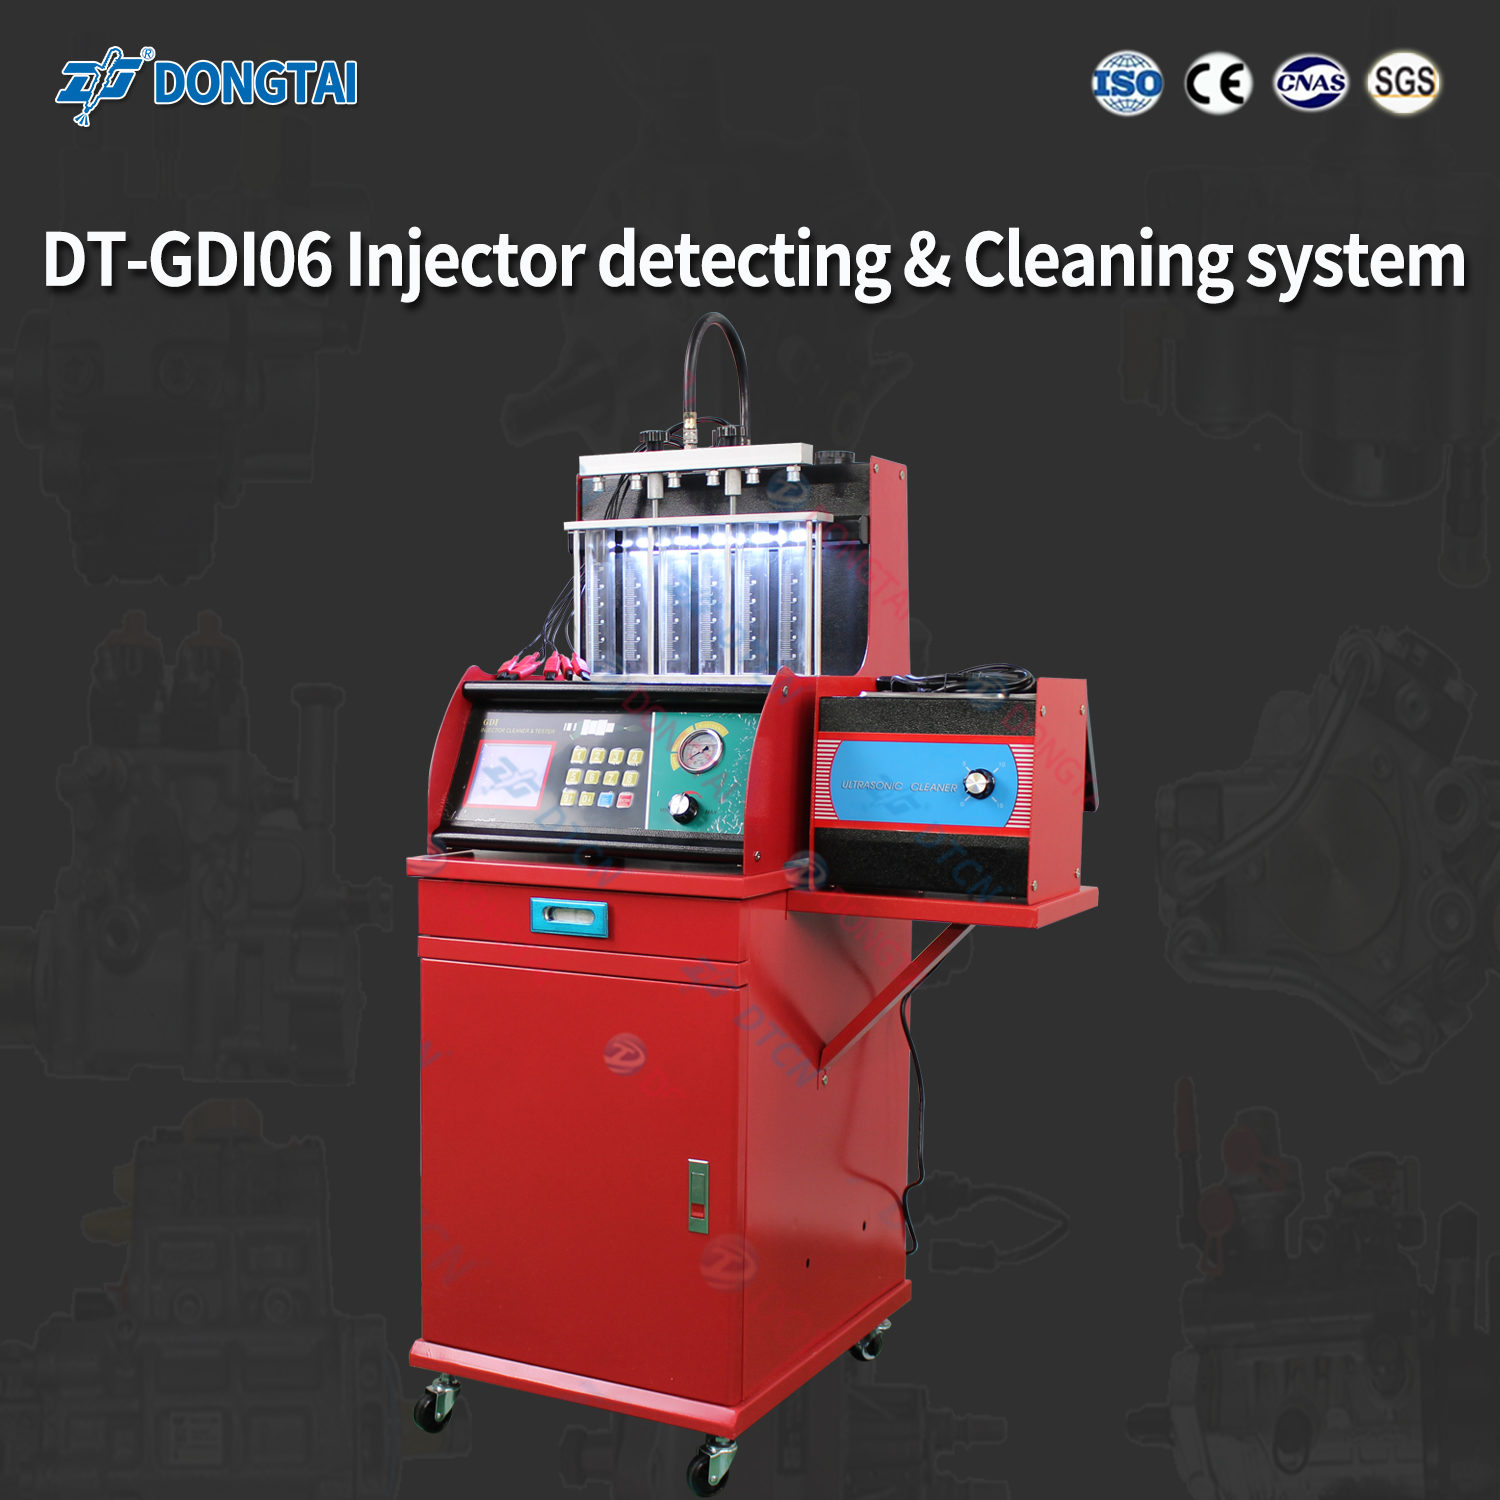 DT-GDI06 Injector Detecting & Cleaning System GDI Injector Cleaner and Analyzer Featured Image